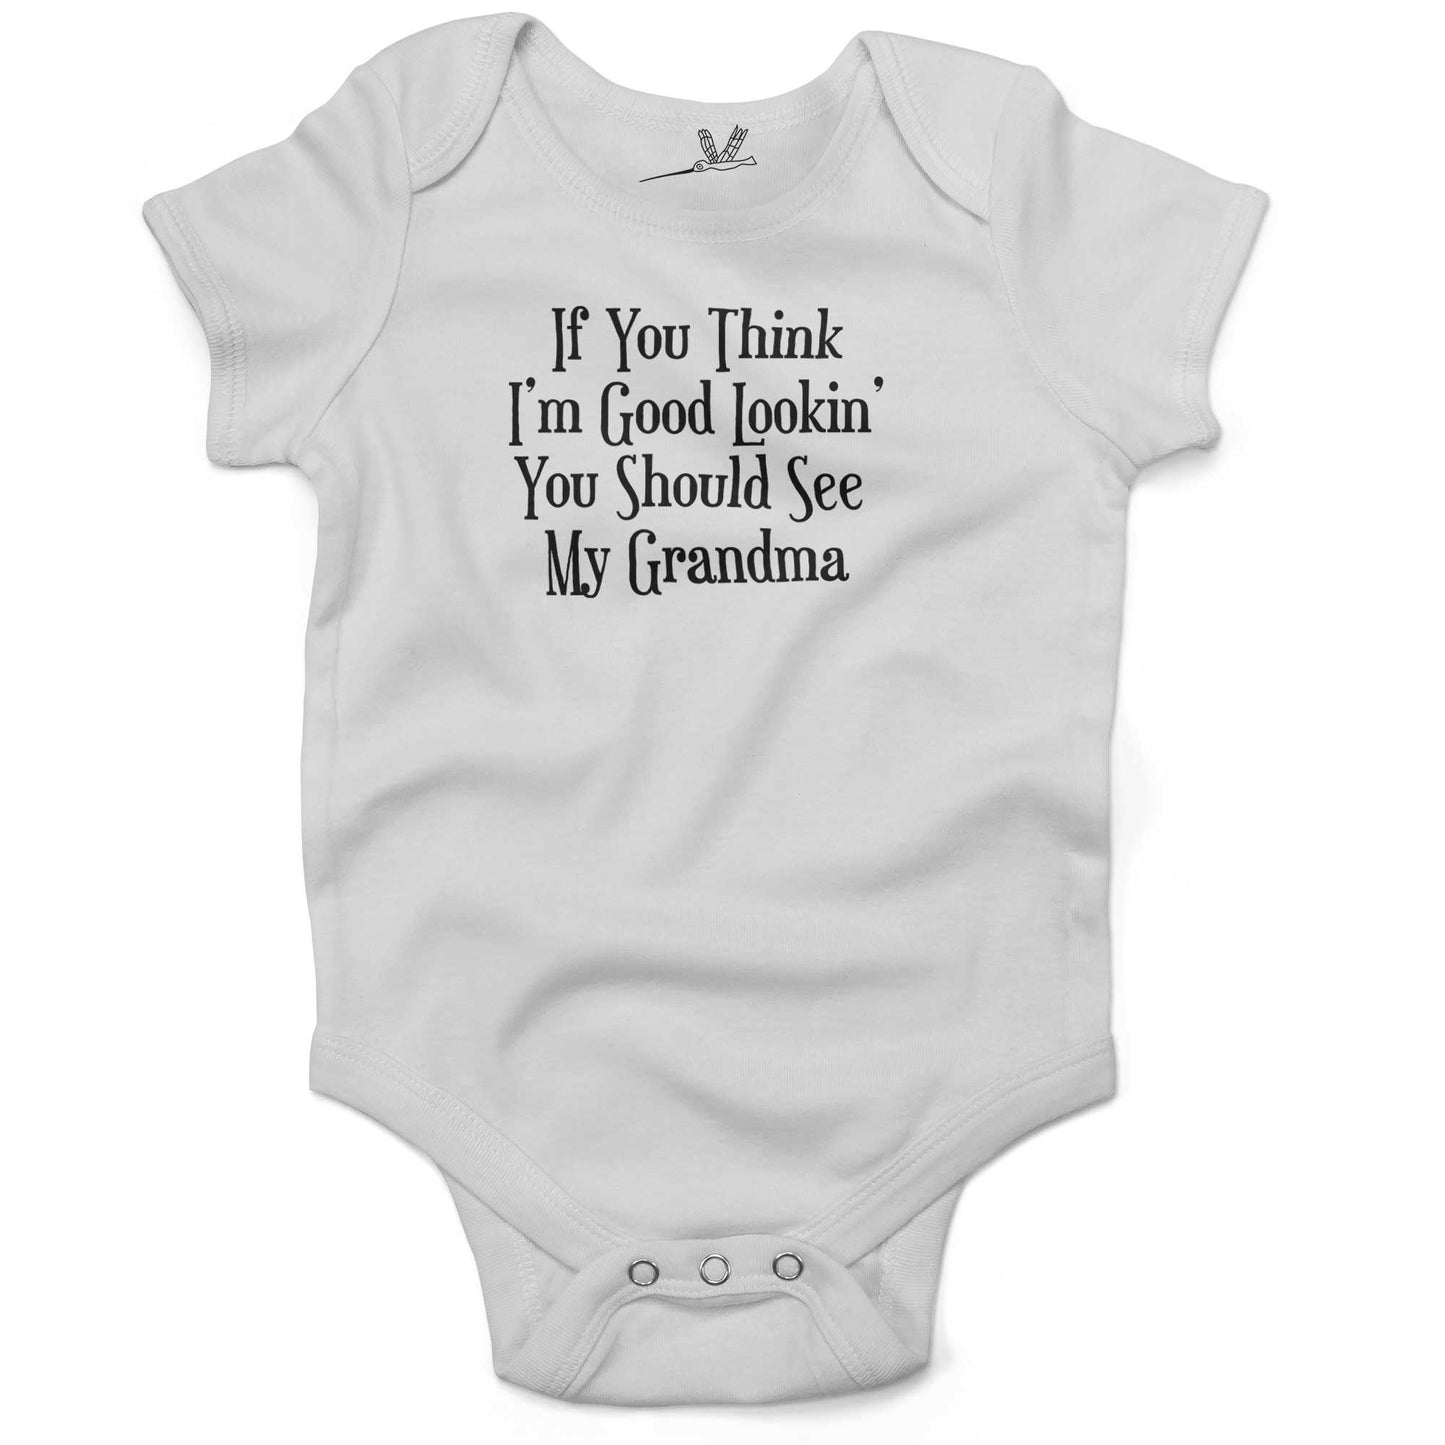 If You Think I'm Good Lookin', You Should See My Grandma Infant Bodysuit or Raglan Tee-White-3-6 months